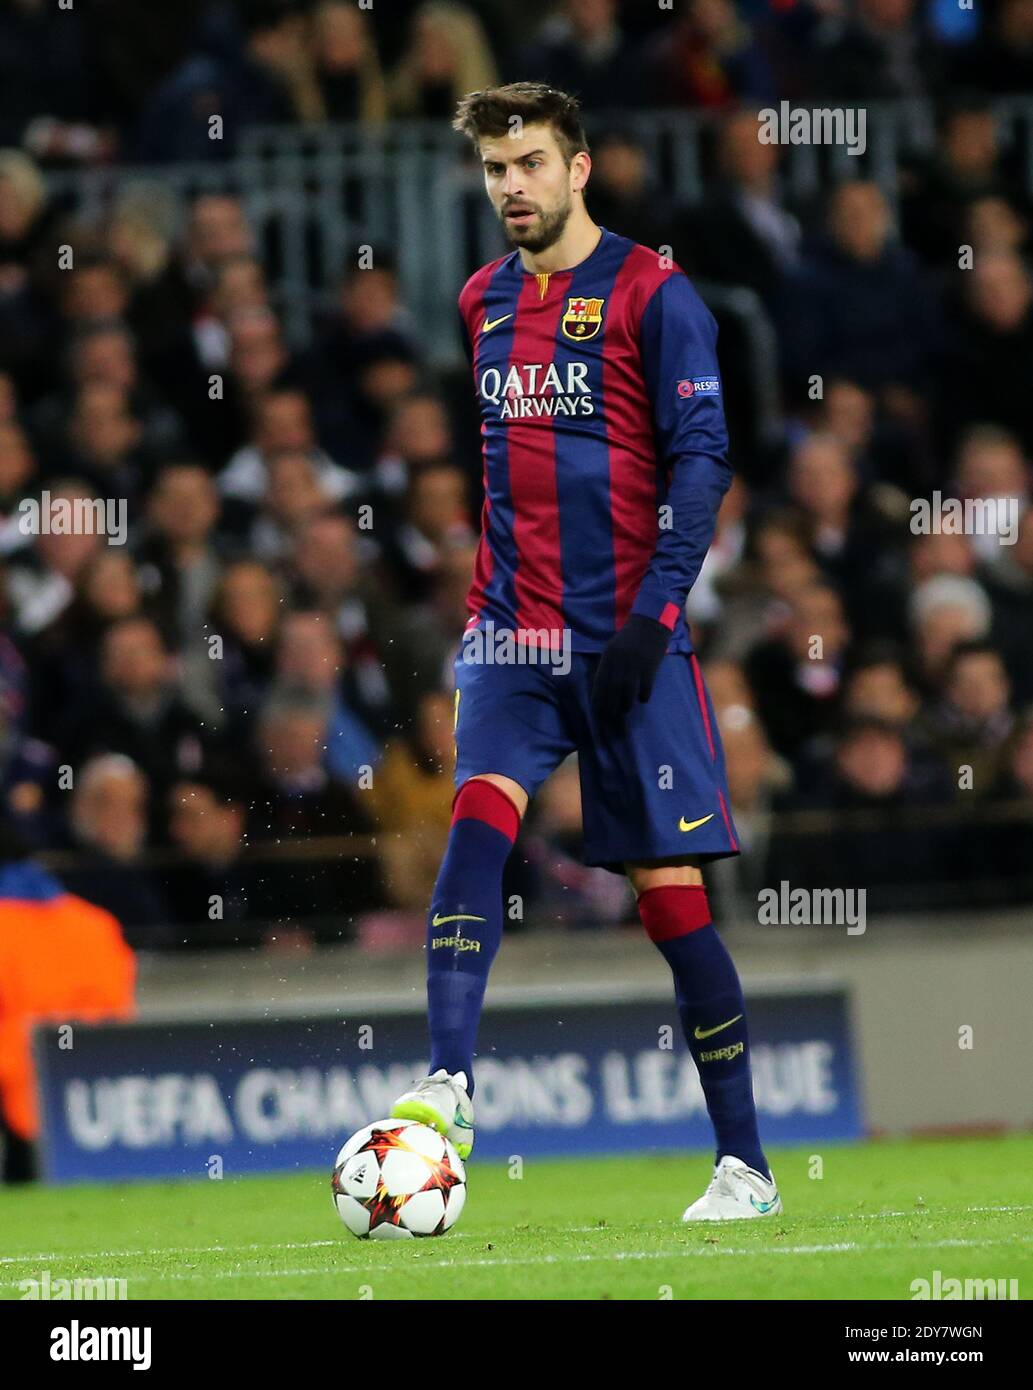 FC Barcelona's Gerard Pique during the UEFA Champions League soccer match,  FC Barcelona Vs Paris Saint-Germain at Camp Nou in Barcelone, Spain on  December 10, 20114. Barcelona won 3-1. Photo by Giuliano